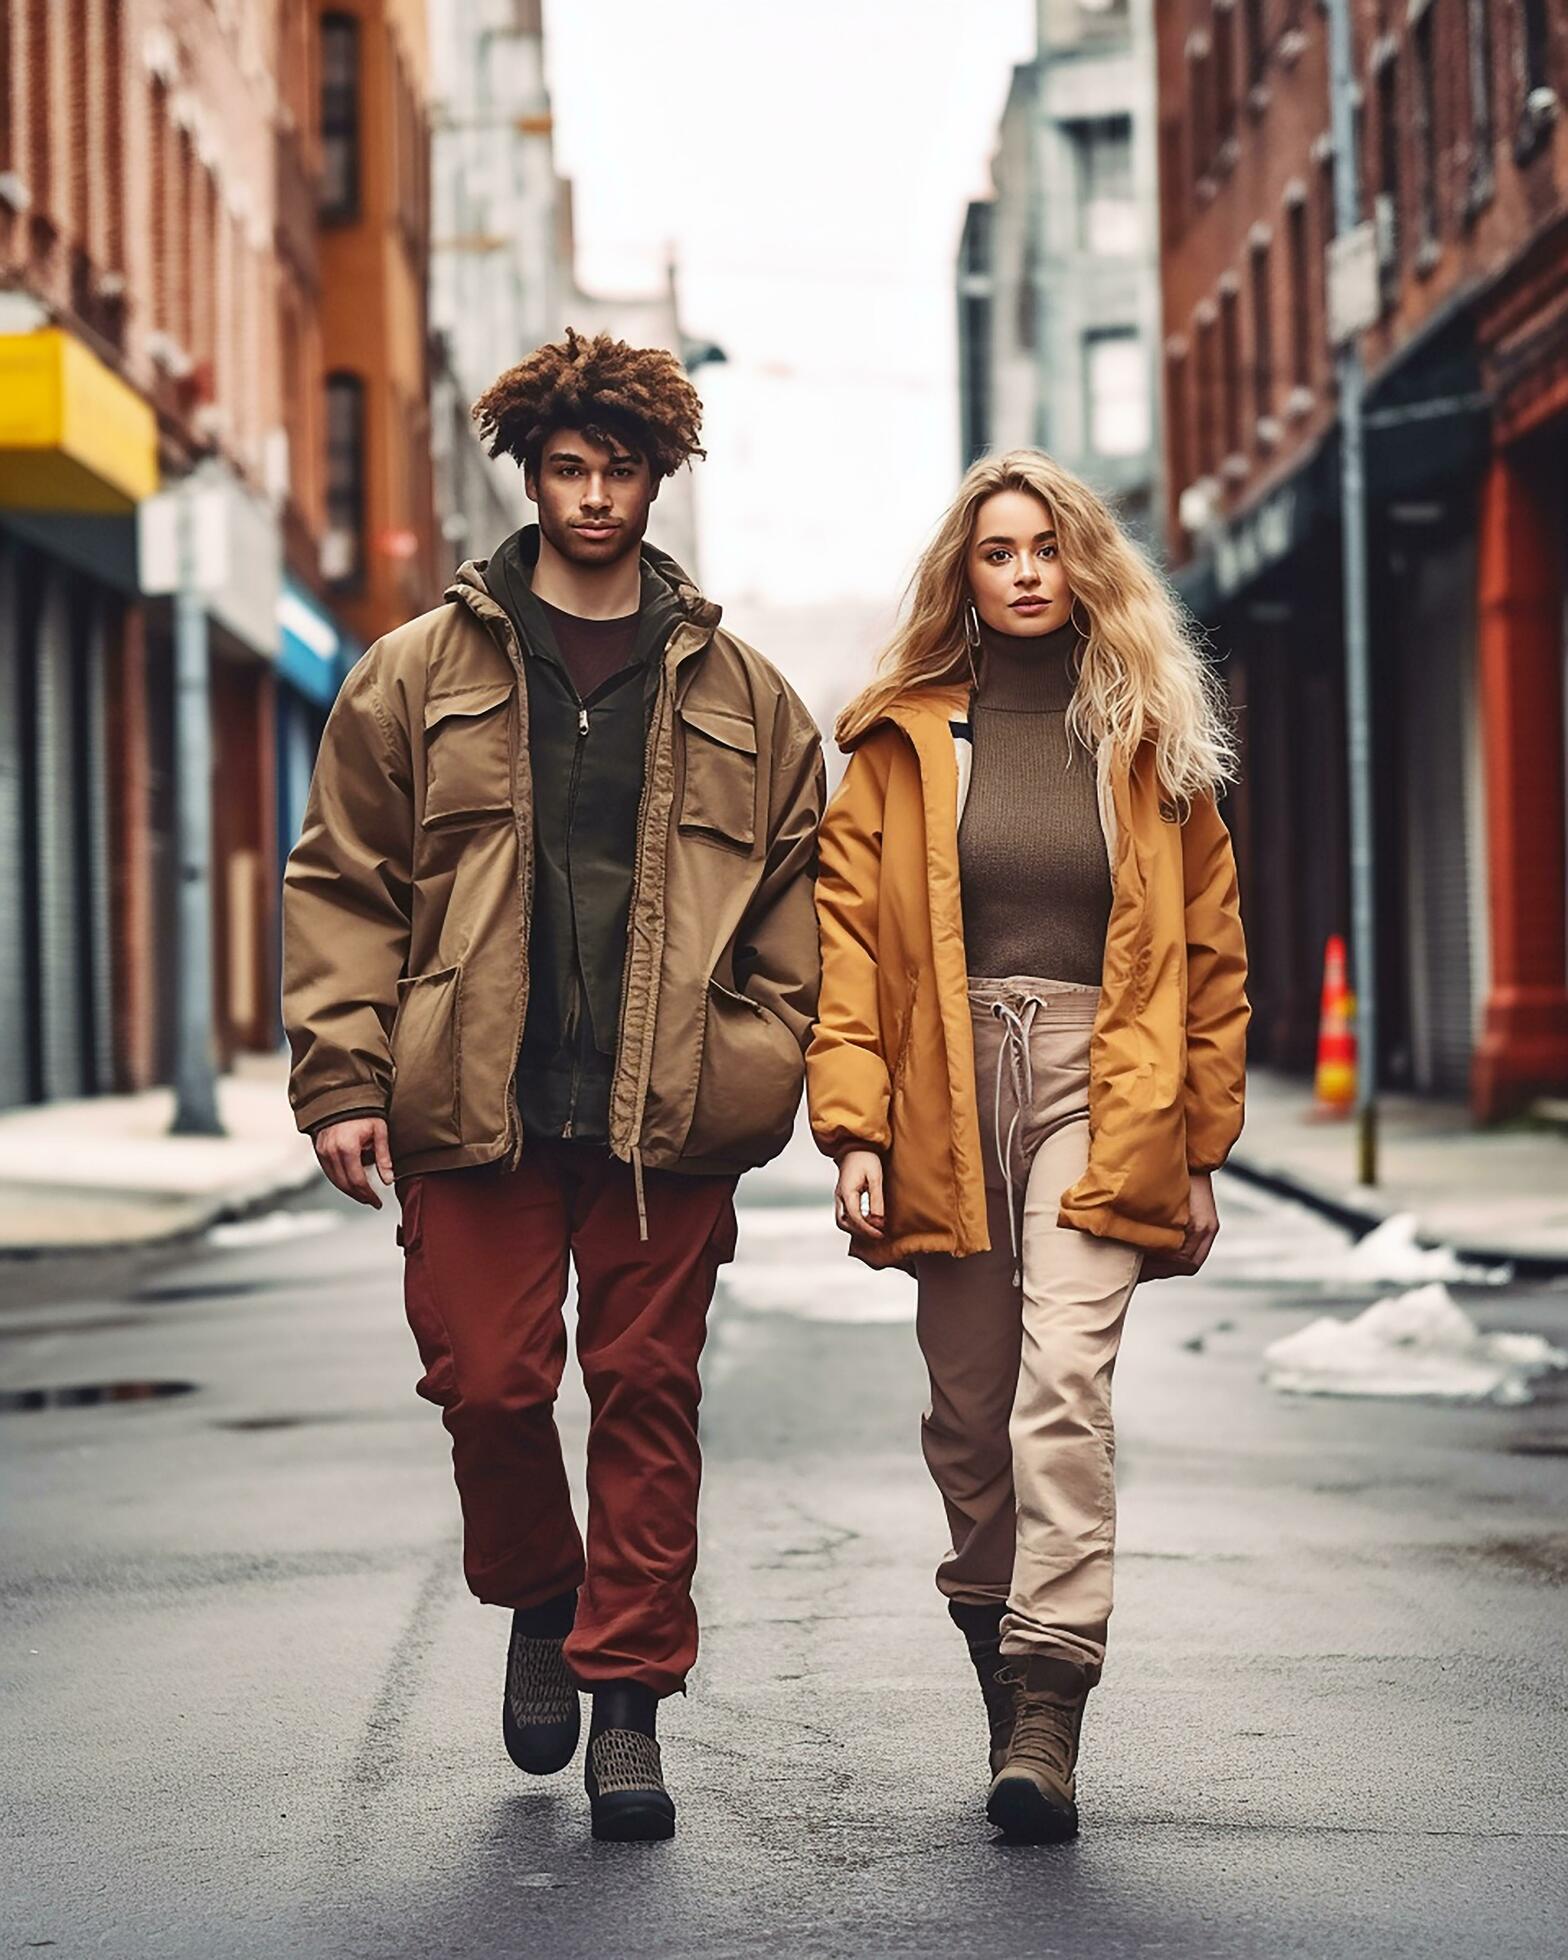 A man and woman walking down a street wearing jackets from the new Eddie Bauer x Pendleton collection. - Gorpcore